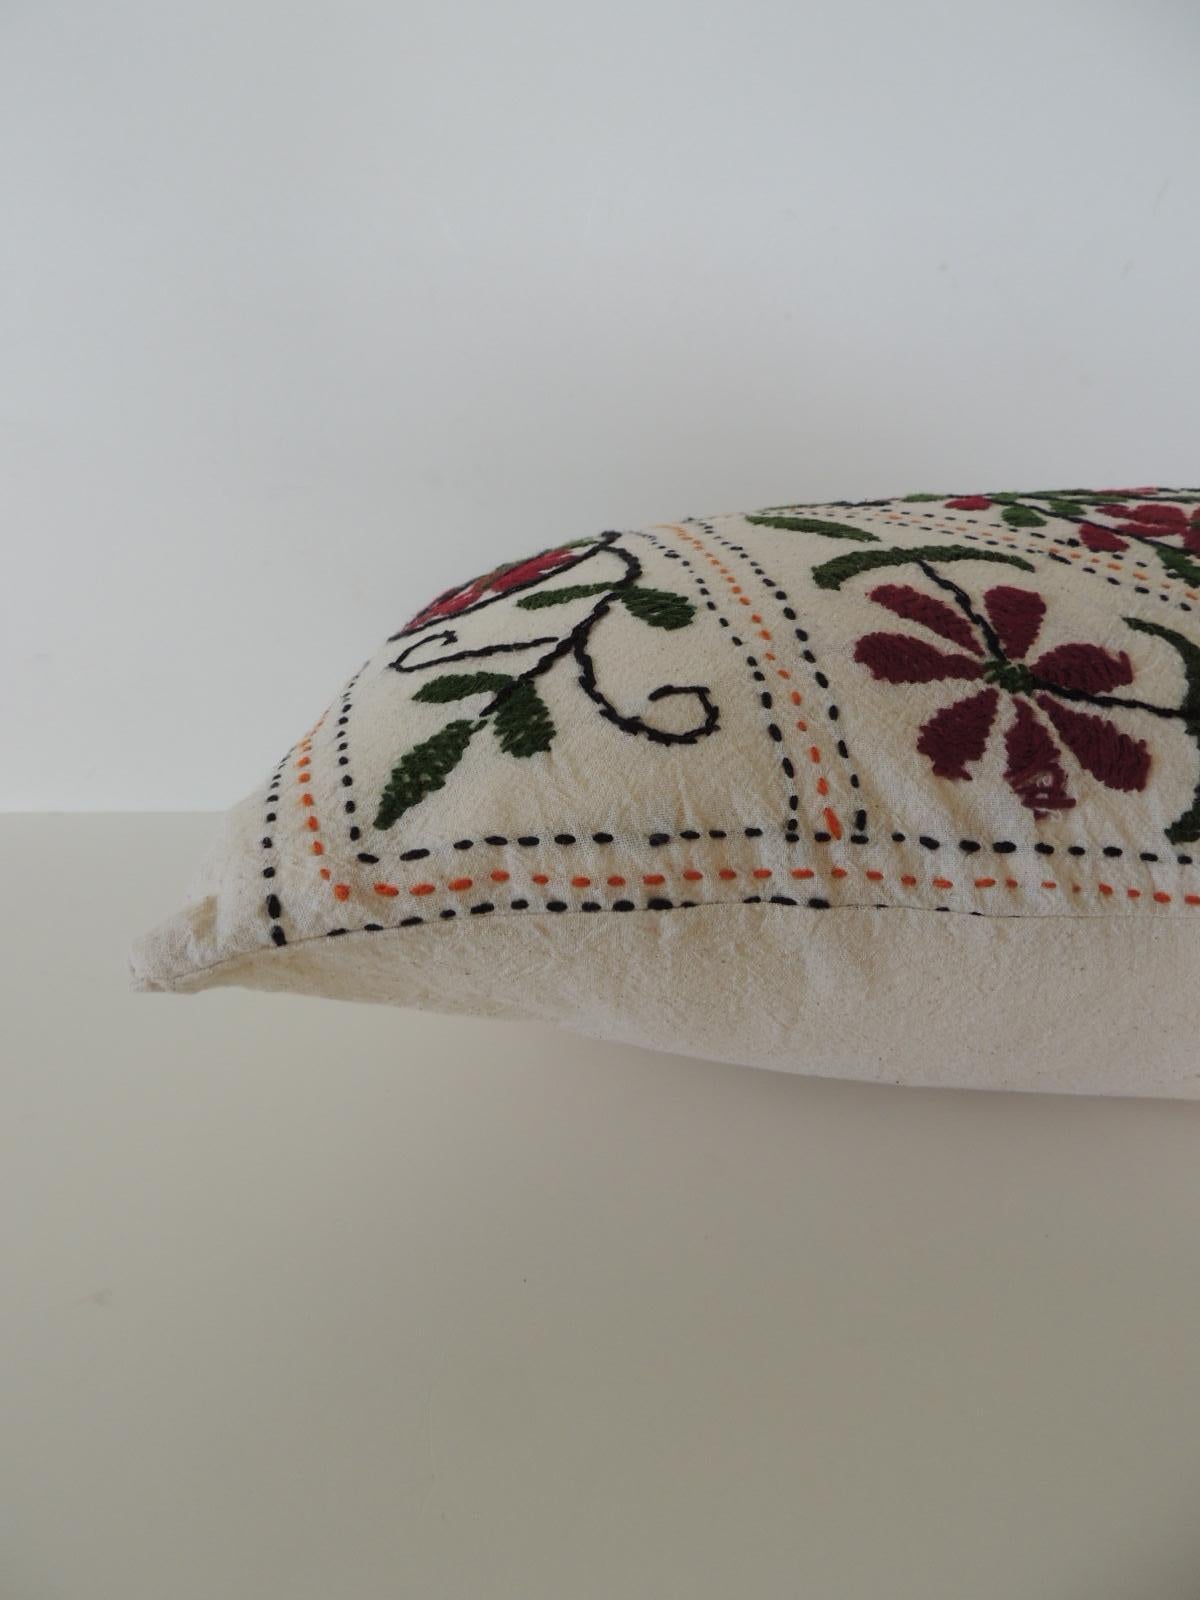 Hand-Crafted Vintage Indian Colorful Floral Embroidered Decorative Bolster Pillow